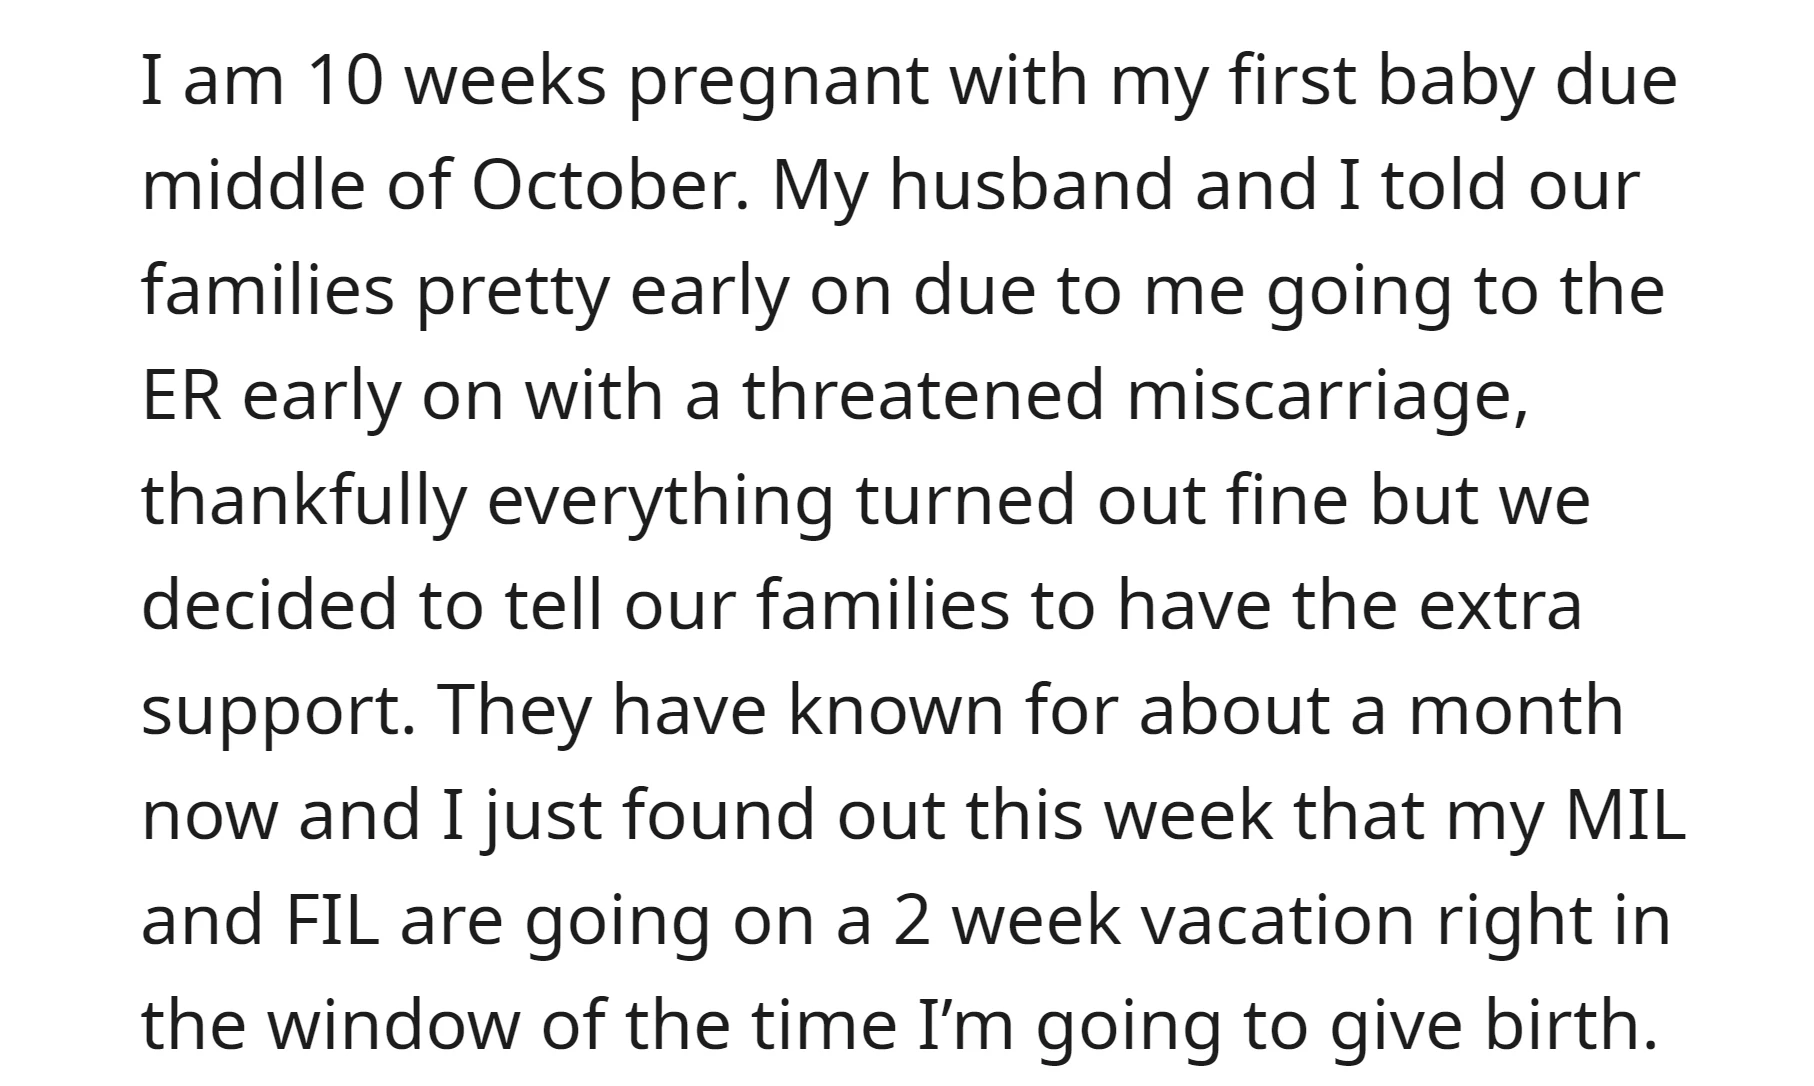 her in-laws will be on a two-week vacation during the expected birth window